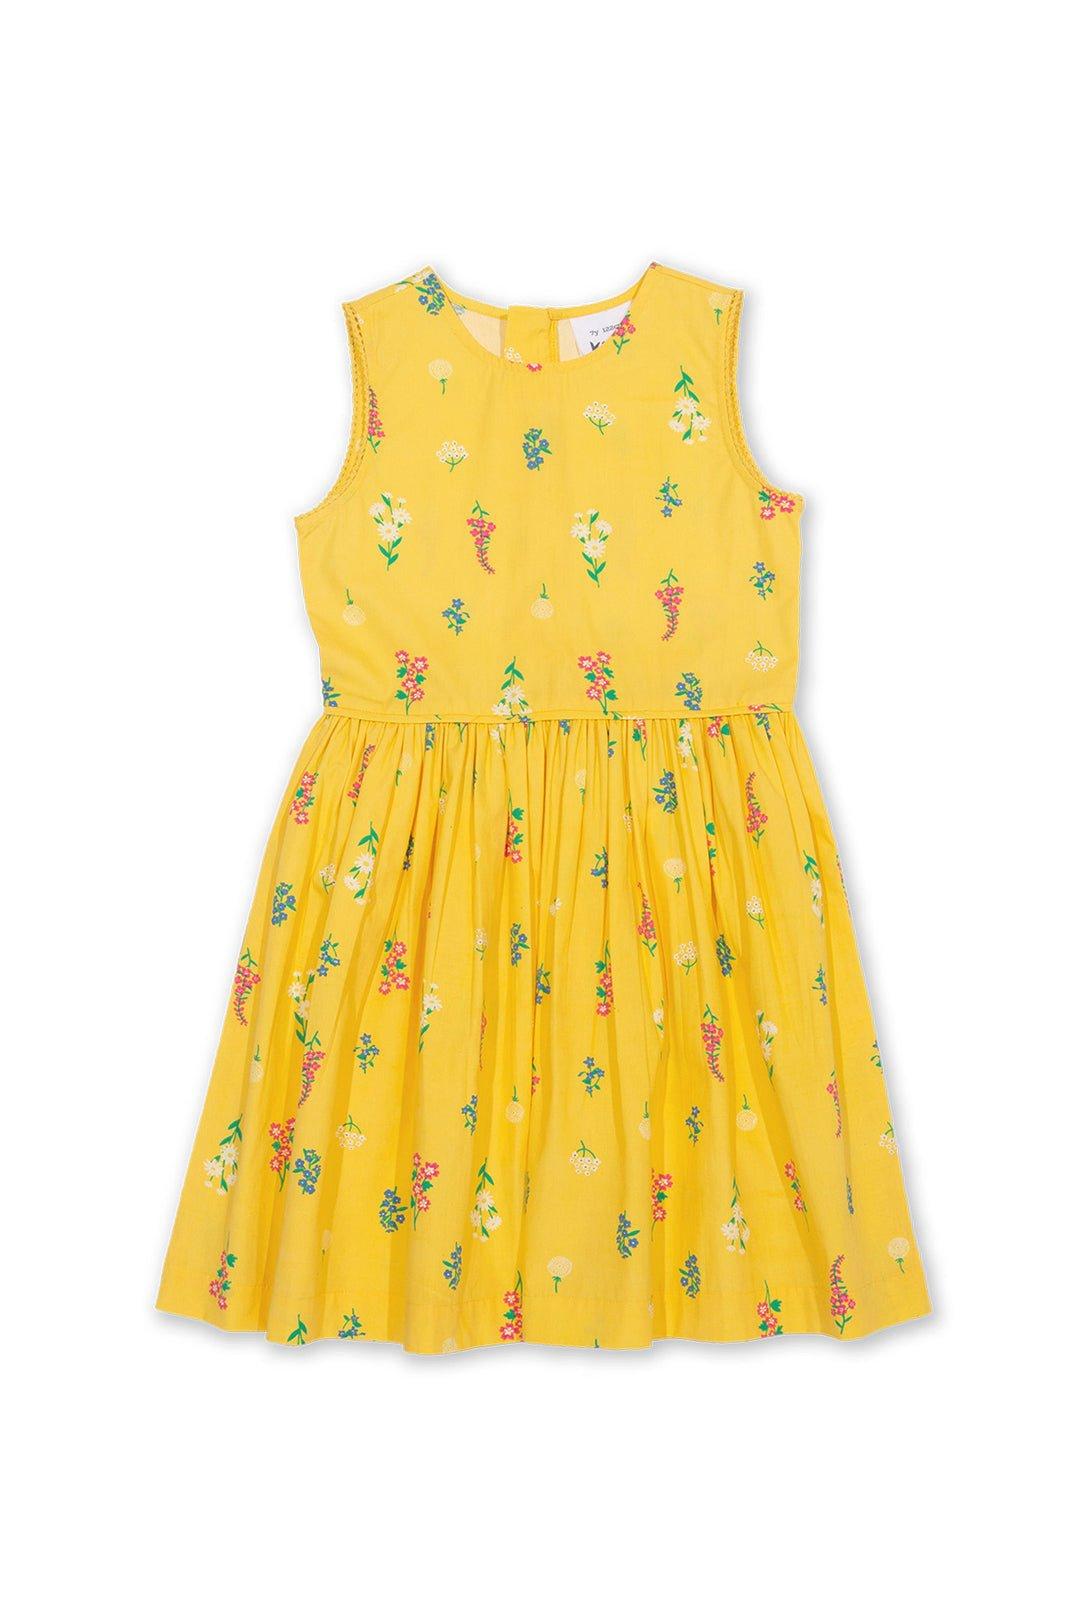 Wilds And Weeds Dress